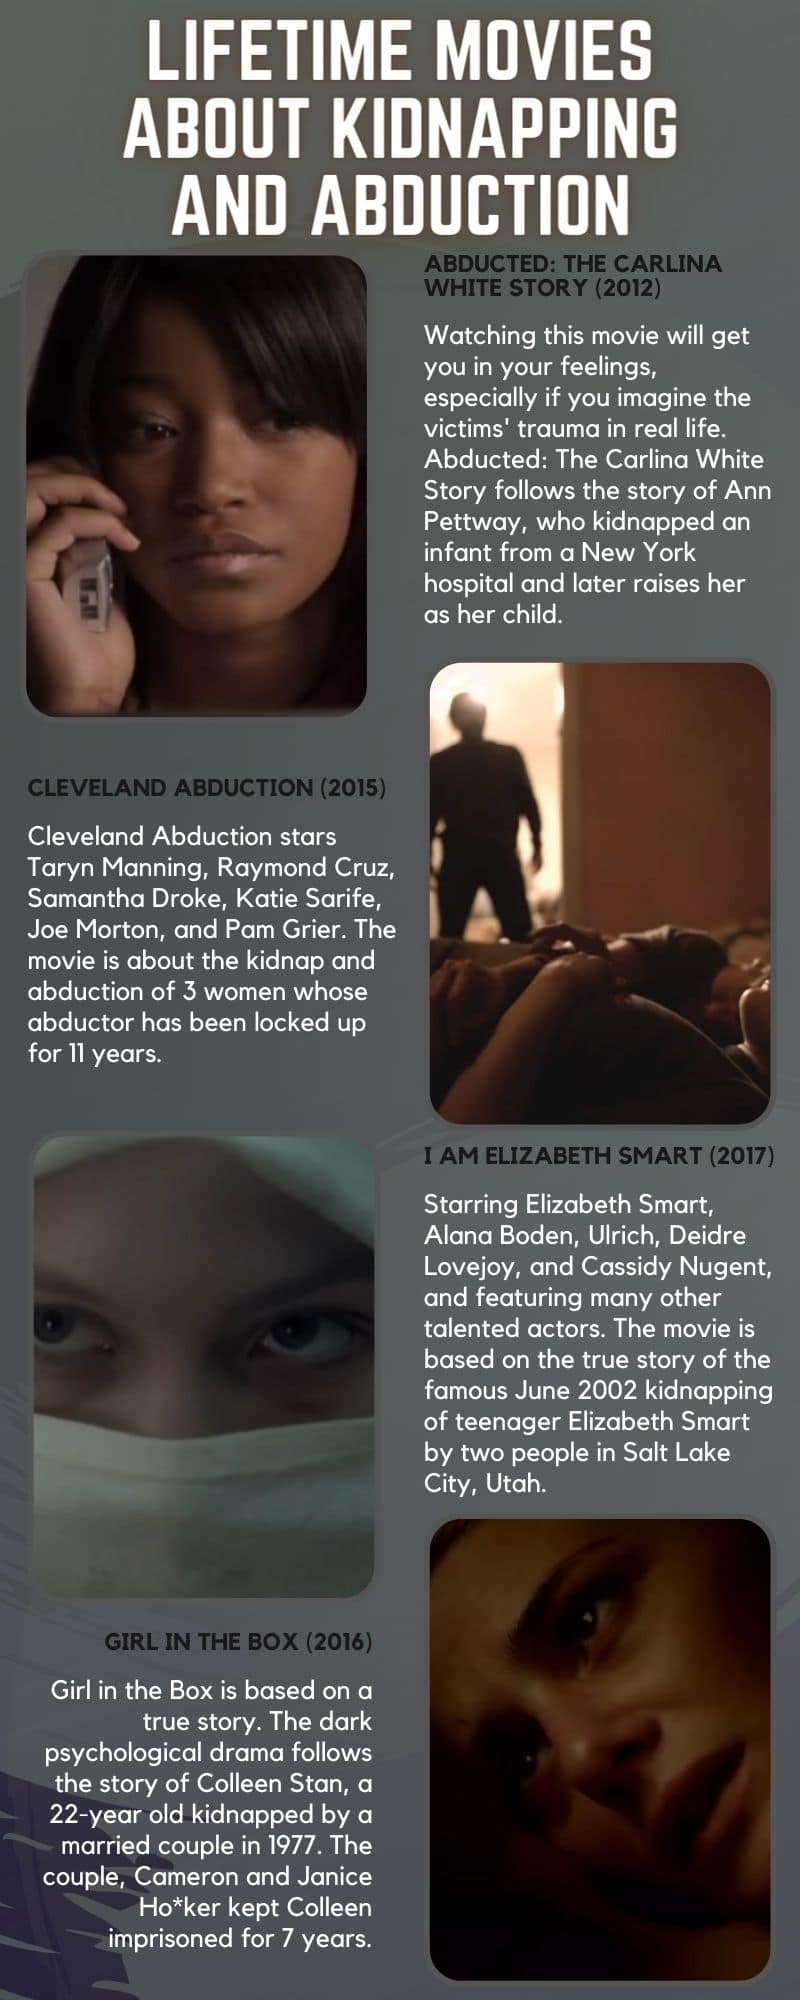 Lifetime movies about kidnapping and abduction